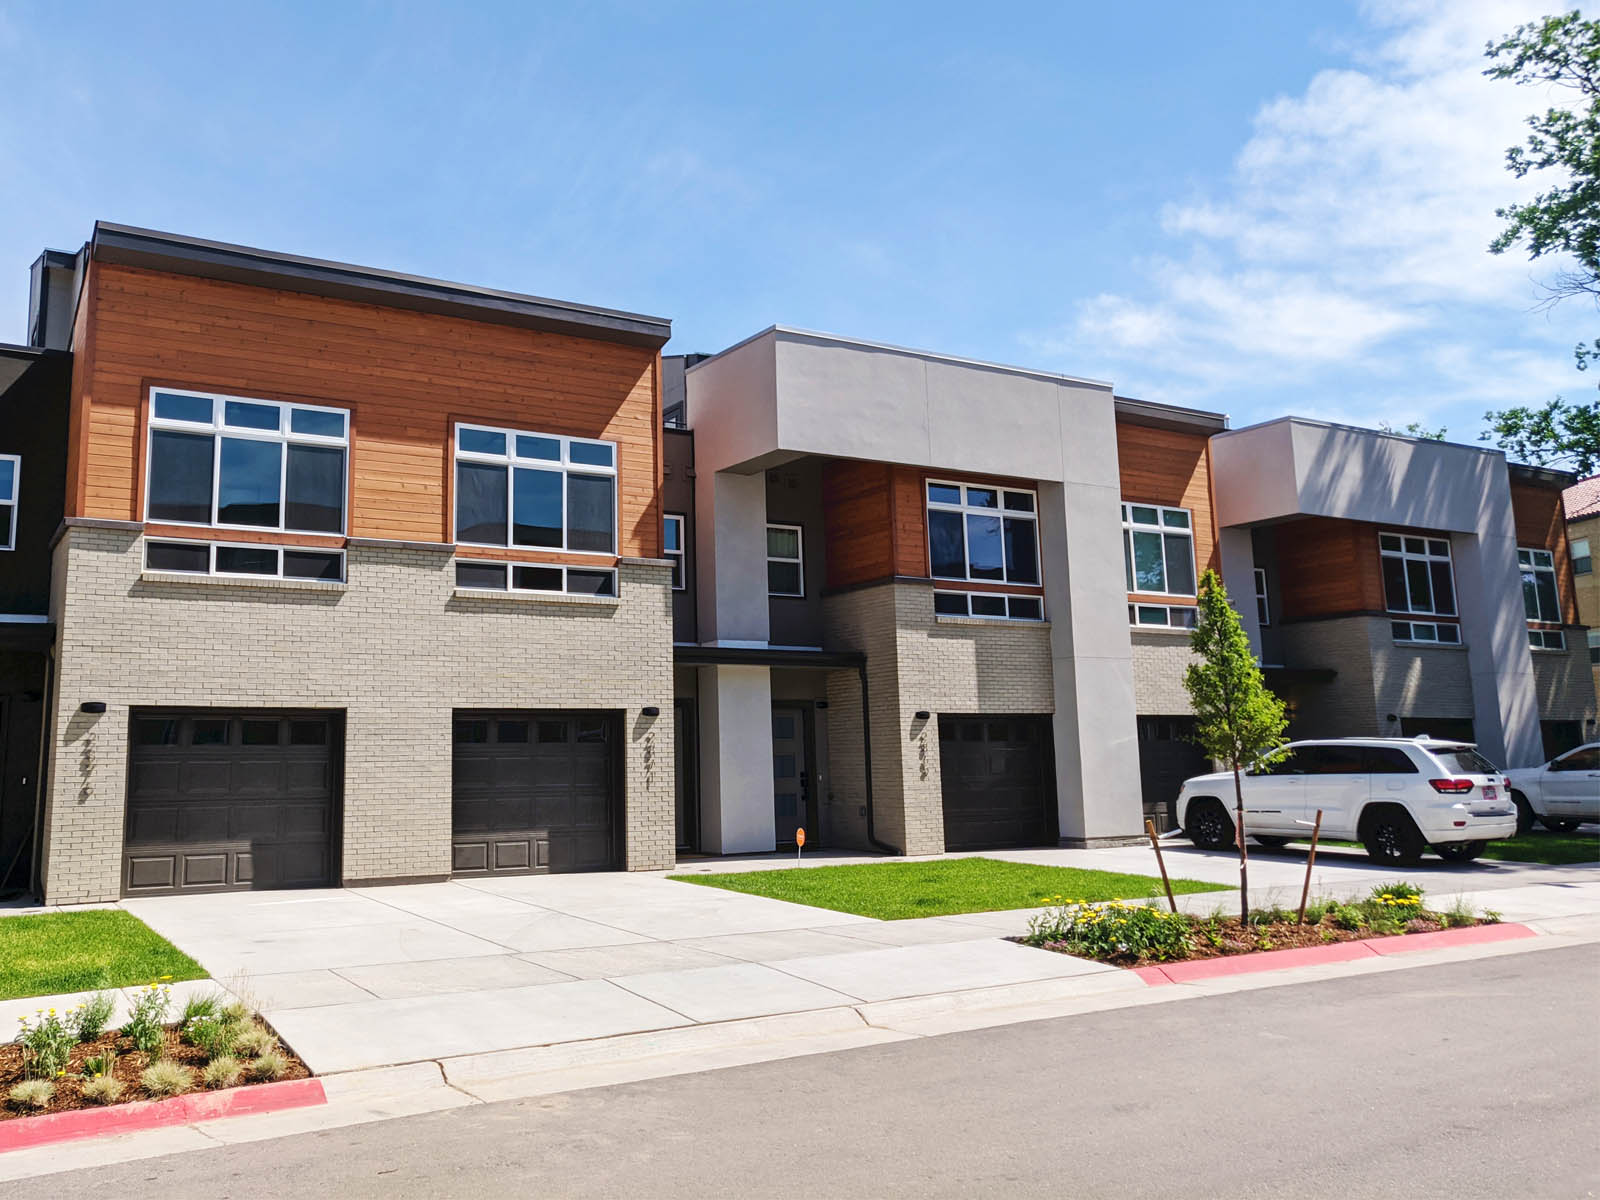 Past residential townhouse multi-family Real estate Projects Weins Development Group - Weins Development Group - Award-winning real estate developers in Denver, Colorado. Top #1 of Builders producing high-quality townhomes, condos, apartments, retail, & office projects